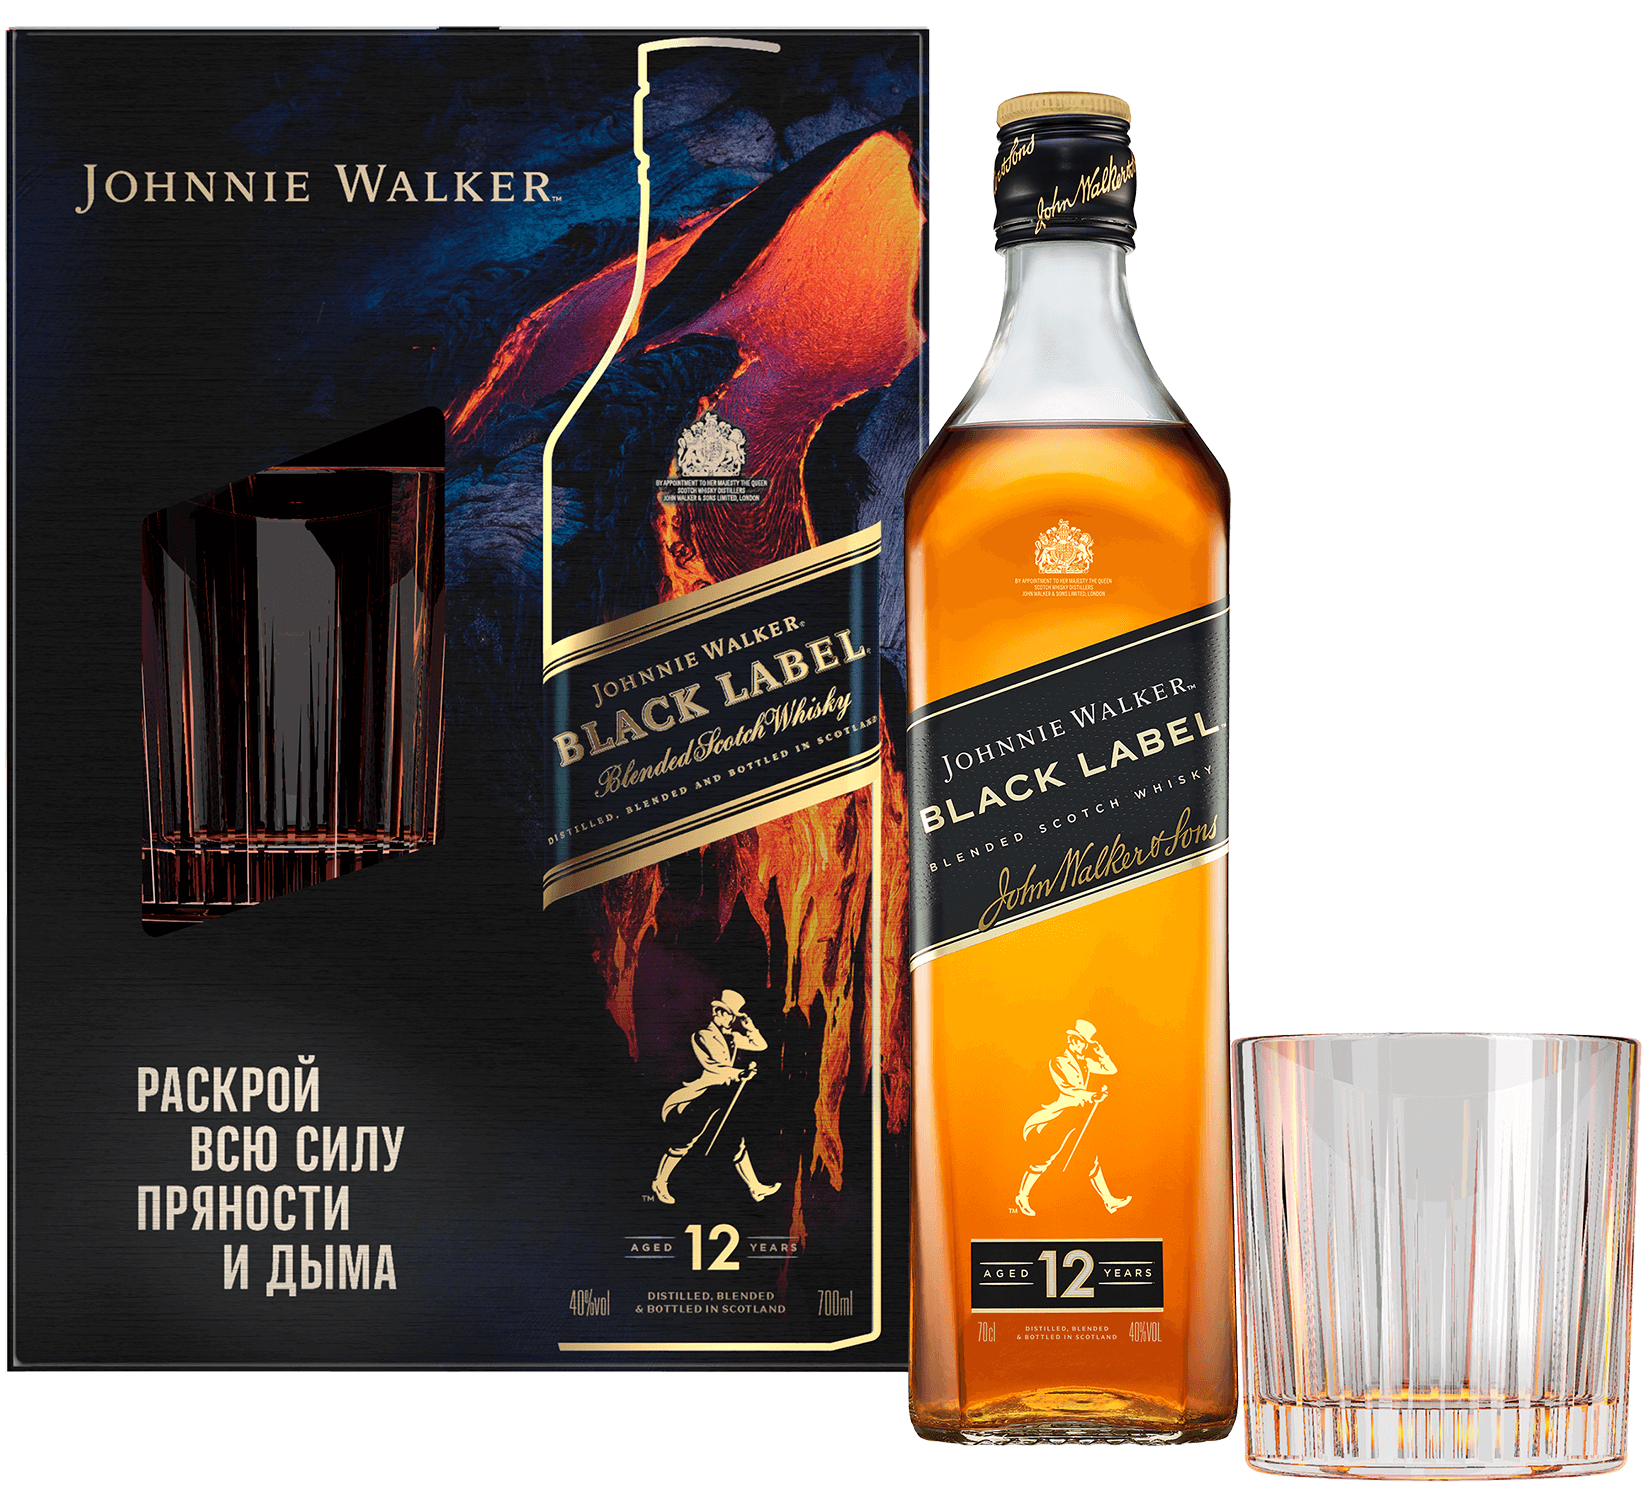 Johnnie Walker Black Label Blended Scotch Whisky (gift box with a glass) clan macgregor blended scotch whisky gift box with a glass